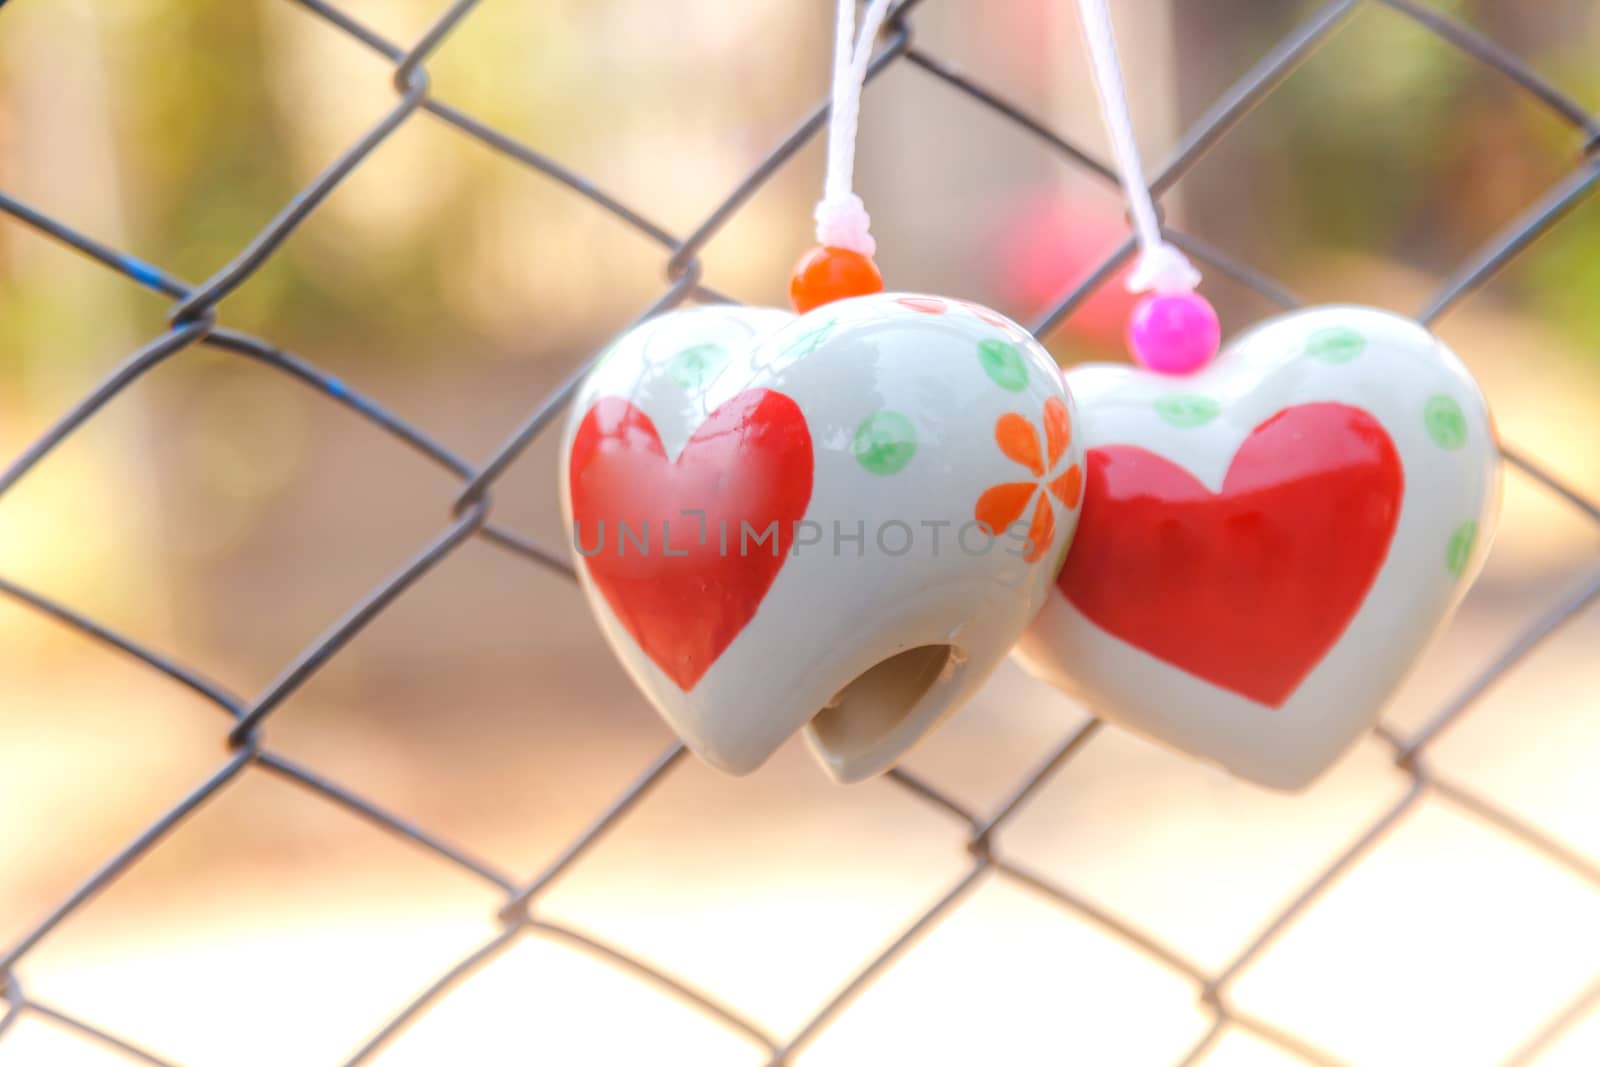 Heart toys on the cage metal net background